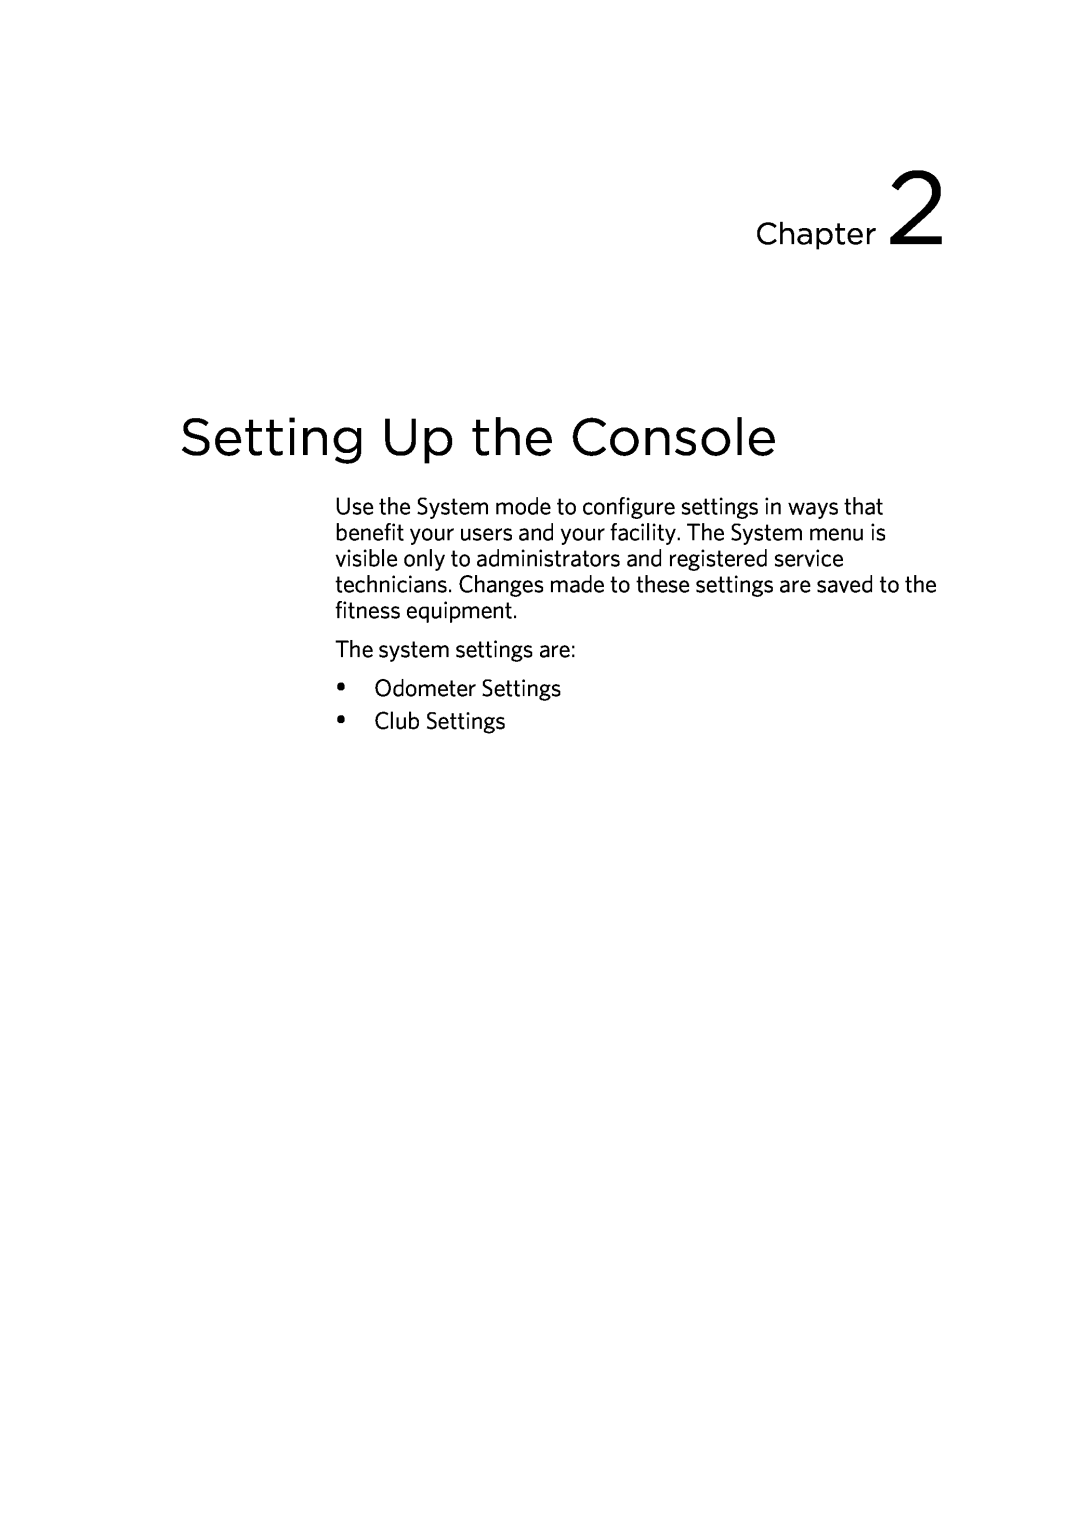 Precor 300753-201 manual Setting Up the Console, Chapter, The system settings are  Odometer Settings  Club Settings 